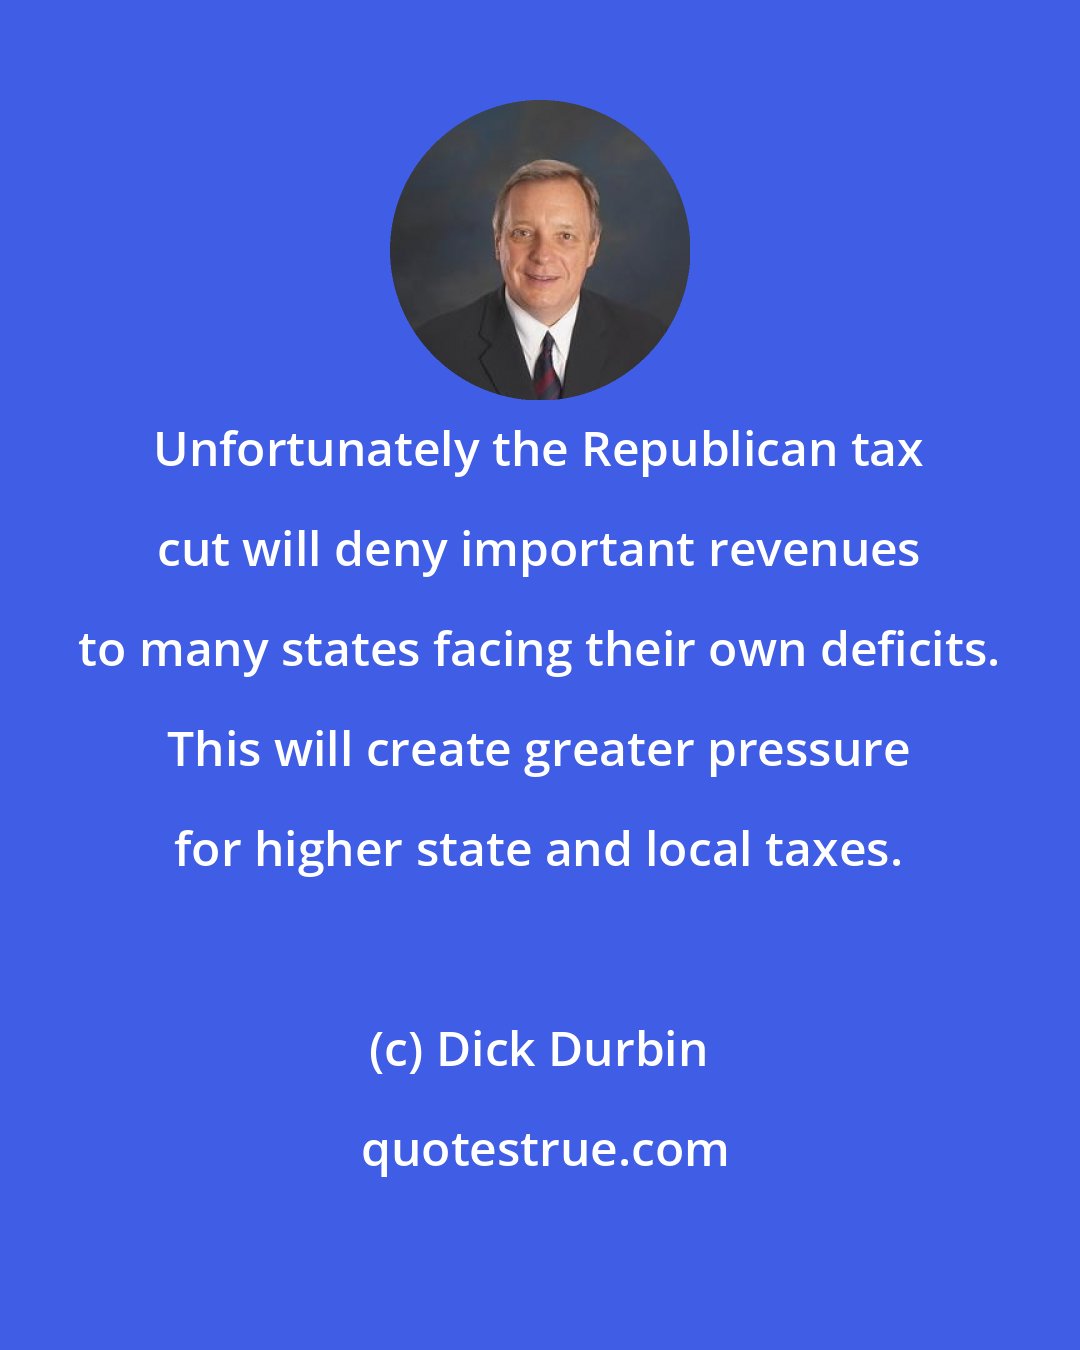 Dick Durbin: Unfortunately the Republican tax cut will deny important revenues to many states facing their own deficits. This will create greater pressure for higher state and local taxes.